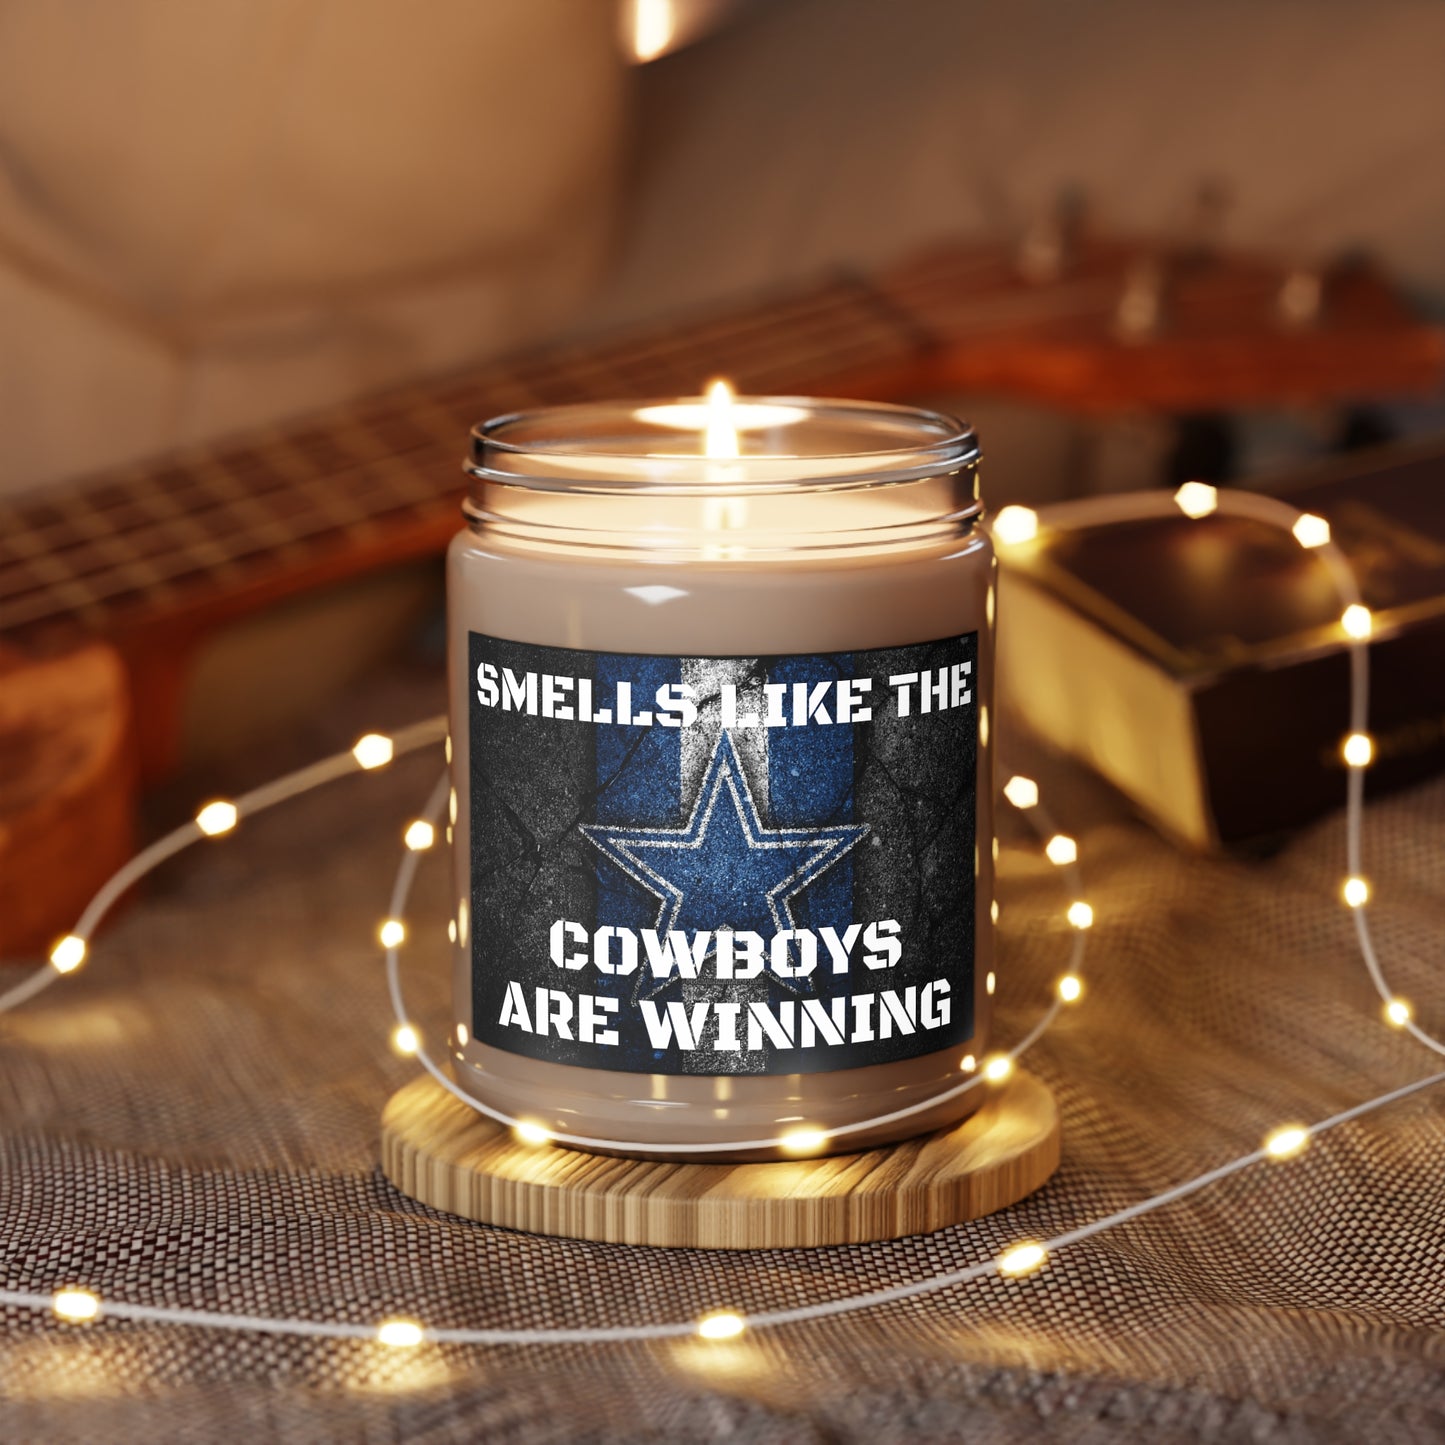 Smells like the Dallas Cowboys are winning Scented Candles, 9oz gift NFL